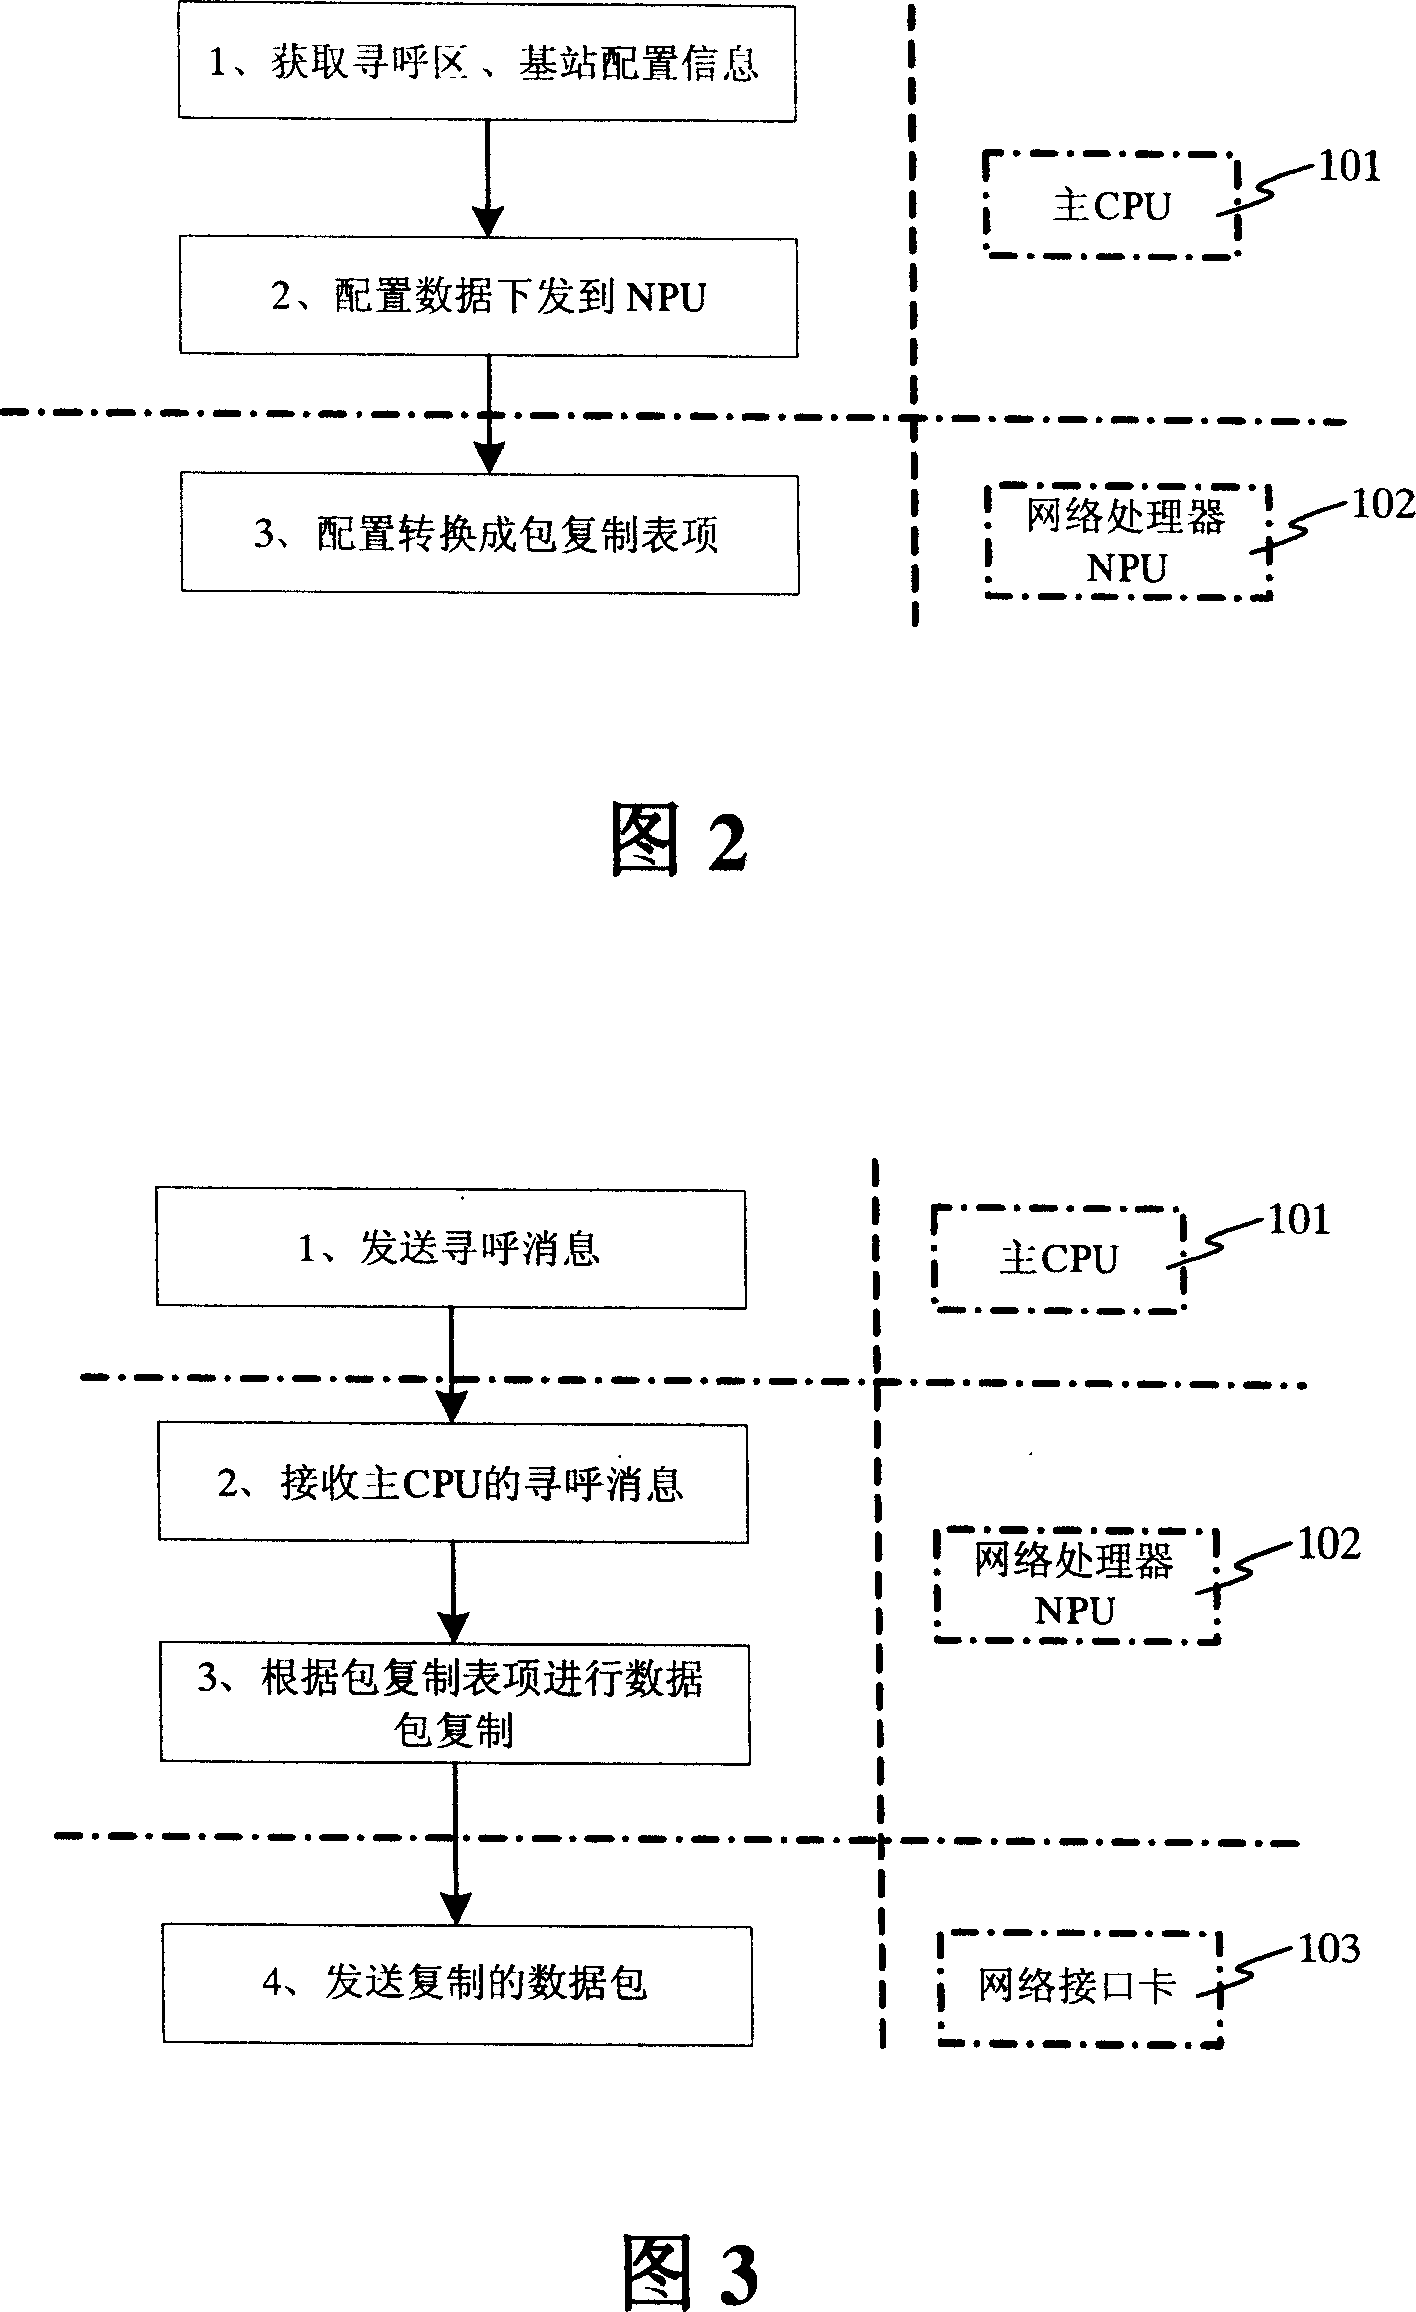 Method for implementing high efficient transmitting calling message at IP network environment